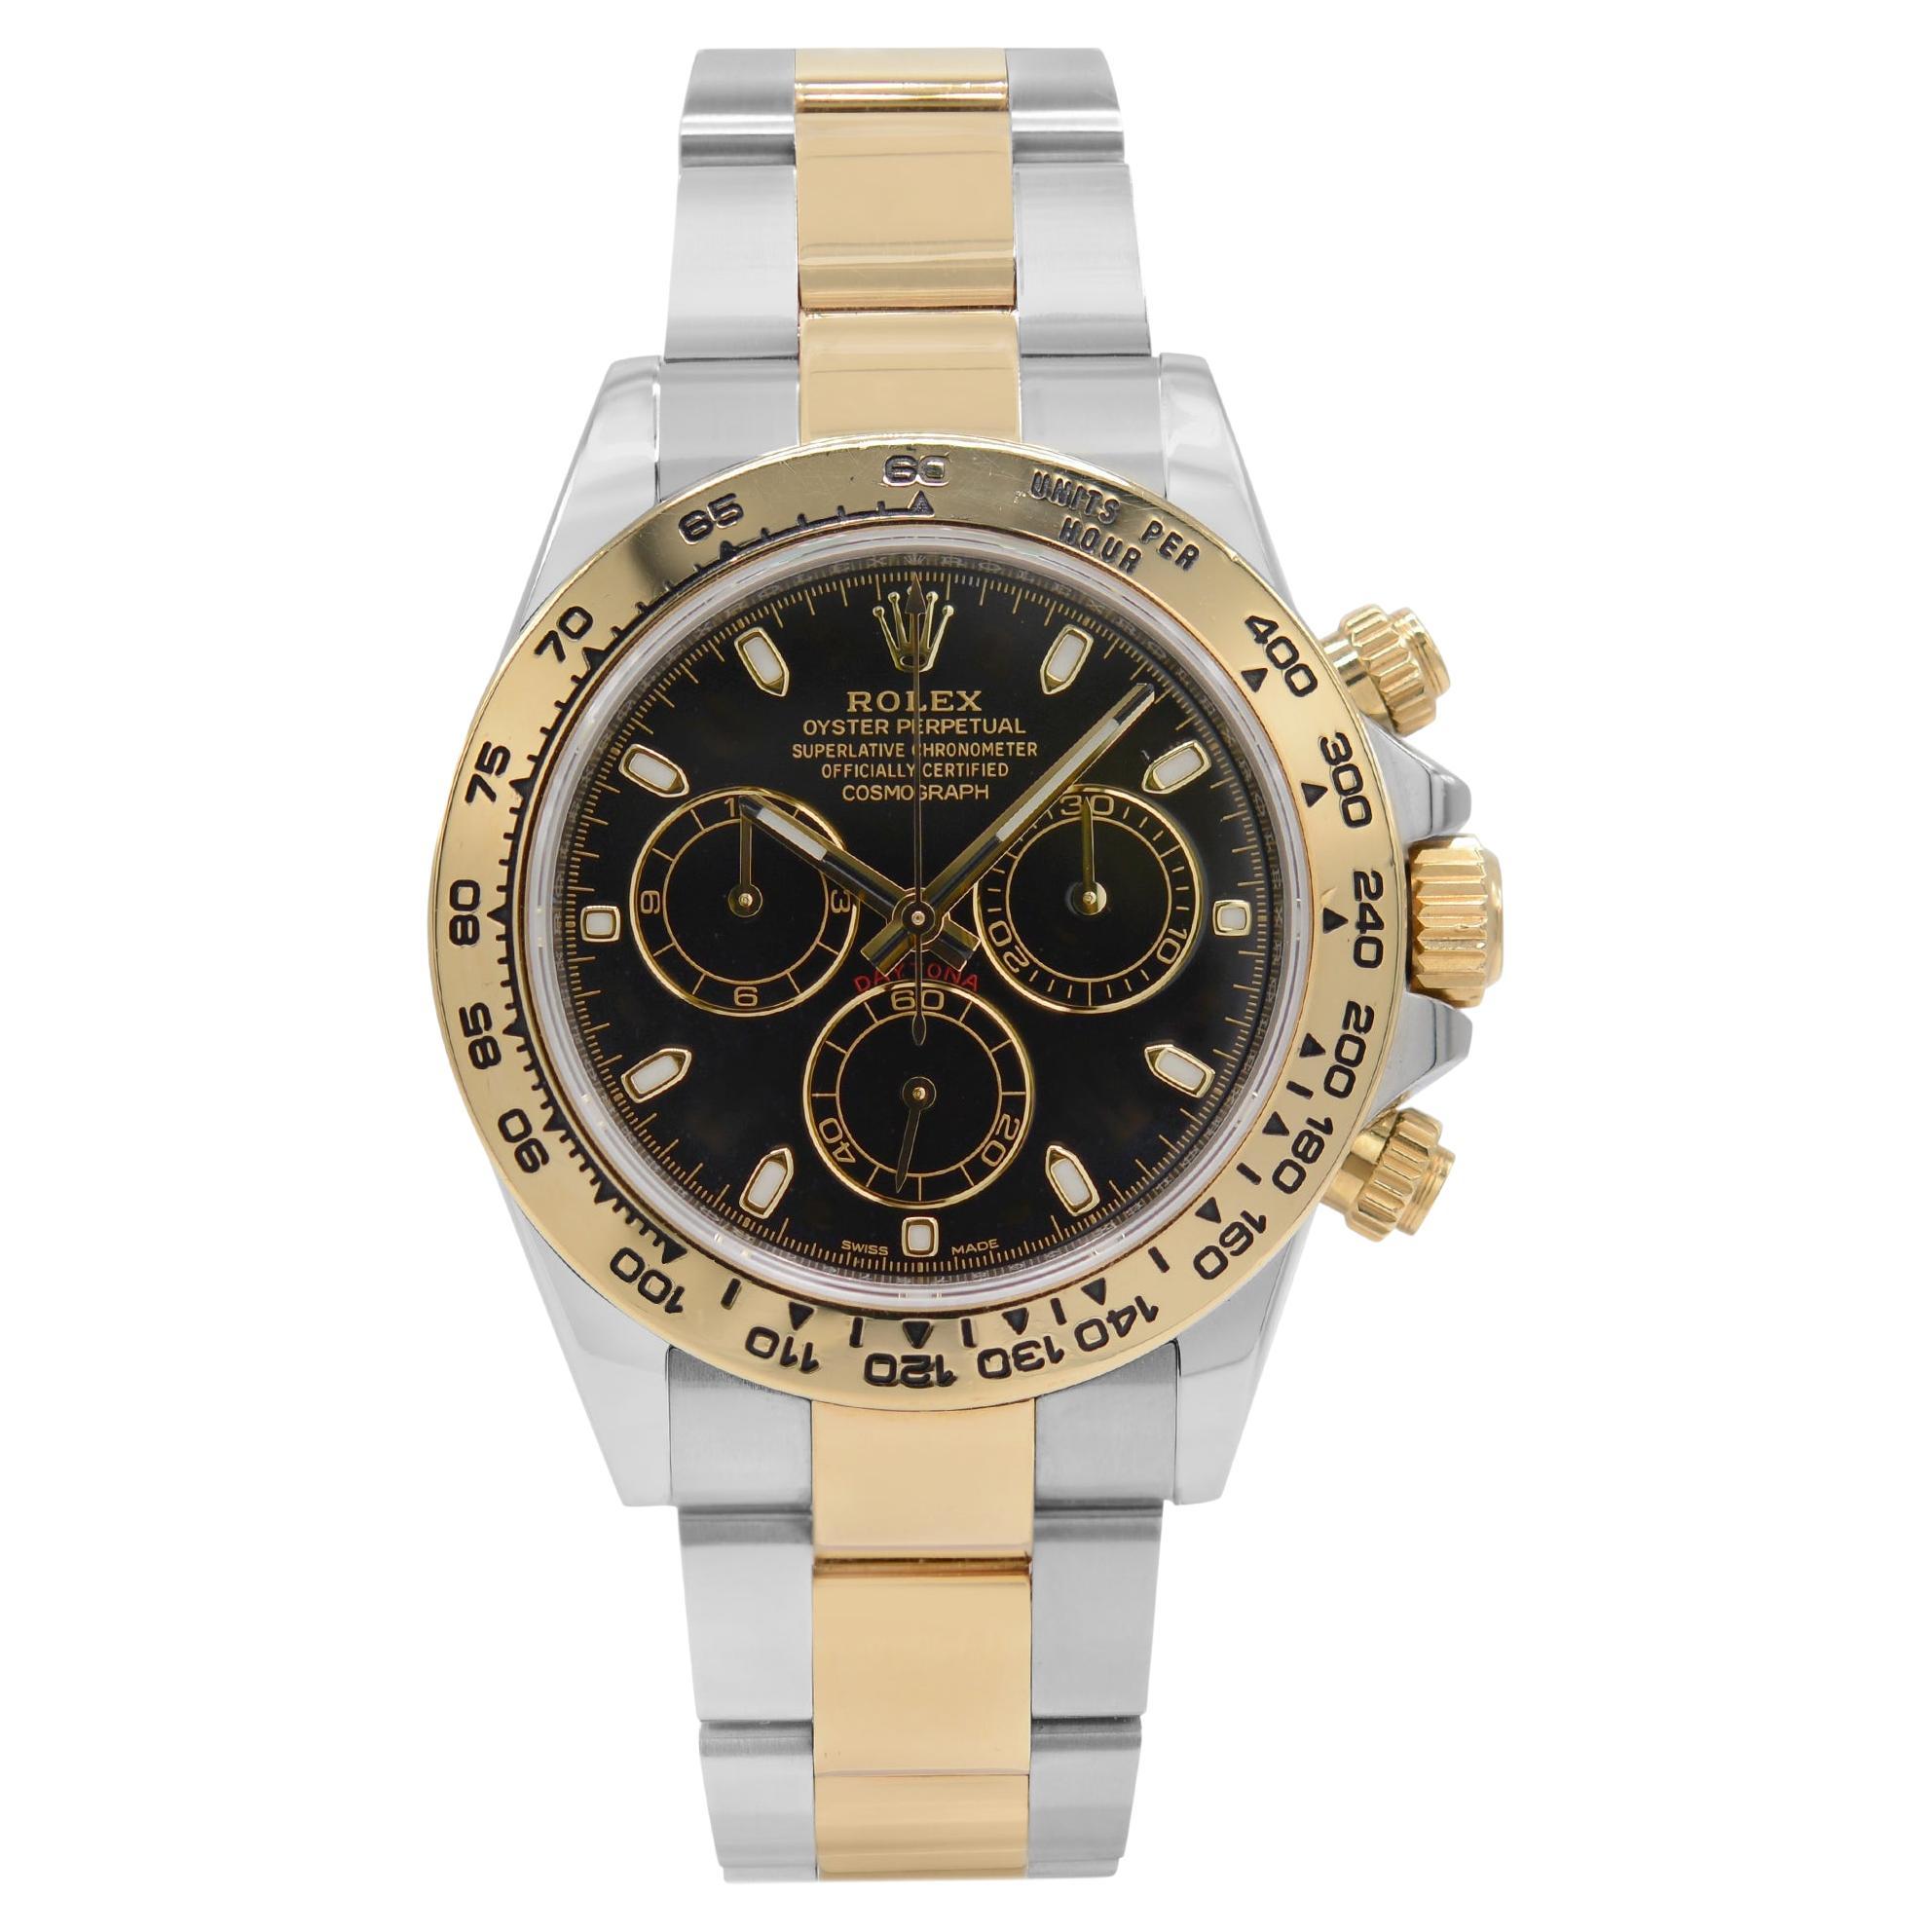 Rolex Daytona Steel 18K Yellow Gold Black Dial Mens Automatic Watch 116503 For Sale